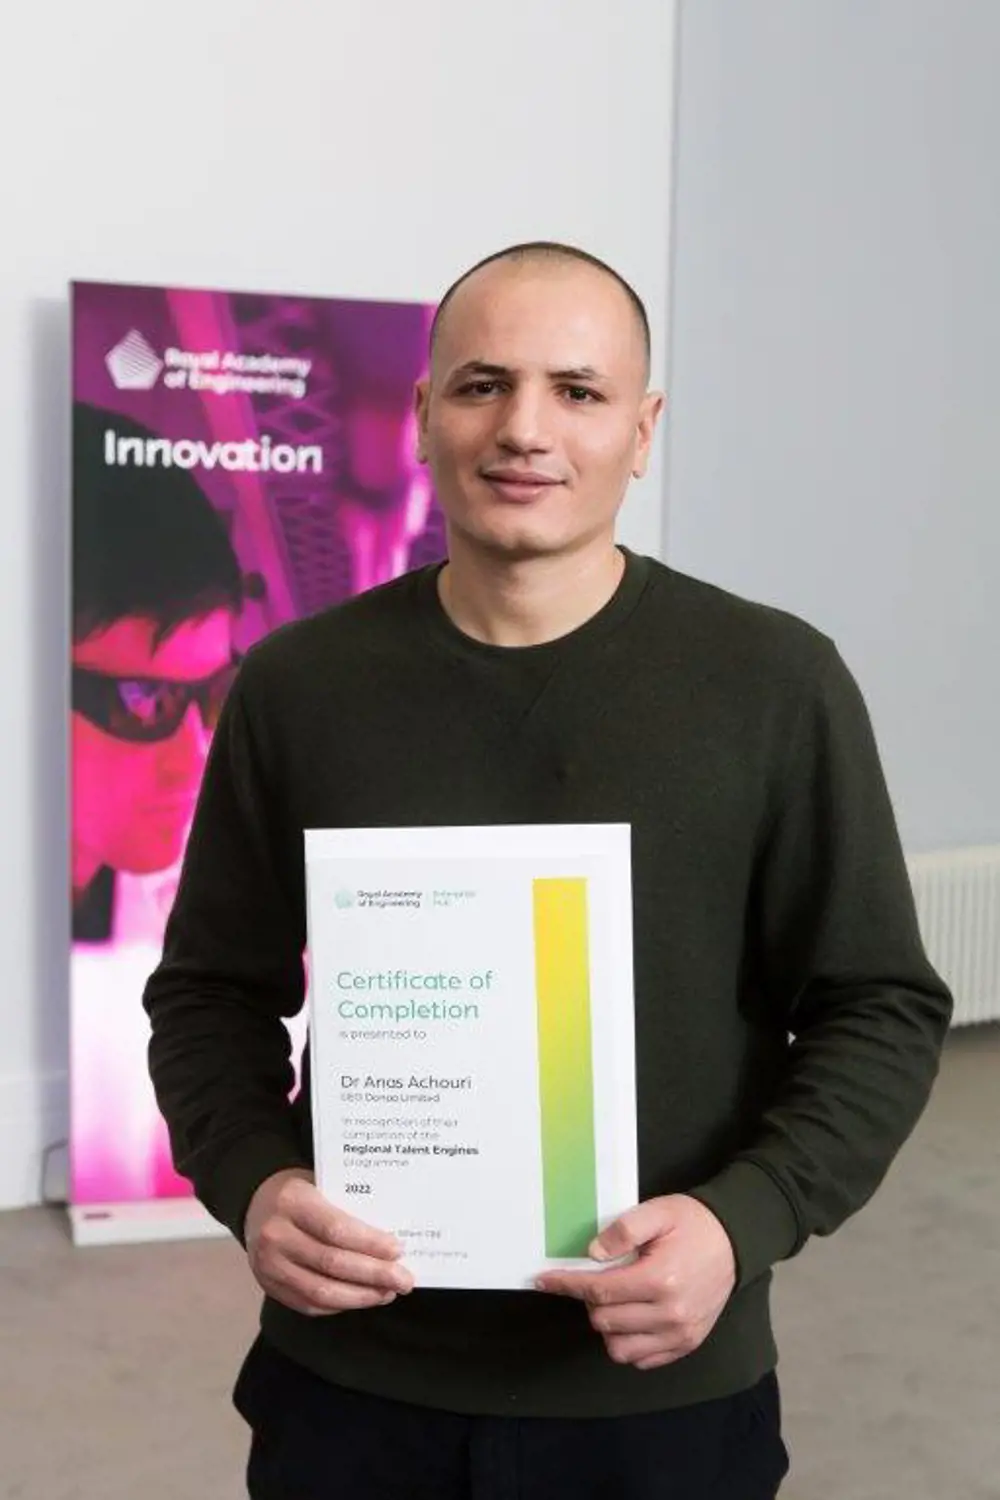 A man standing holding a certificate. It says "Certificate of Completion, as presented to Dr Anas Achouri, CEO of Donaa, in recognition of completing the Regional Talent Engines programme, 2022."